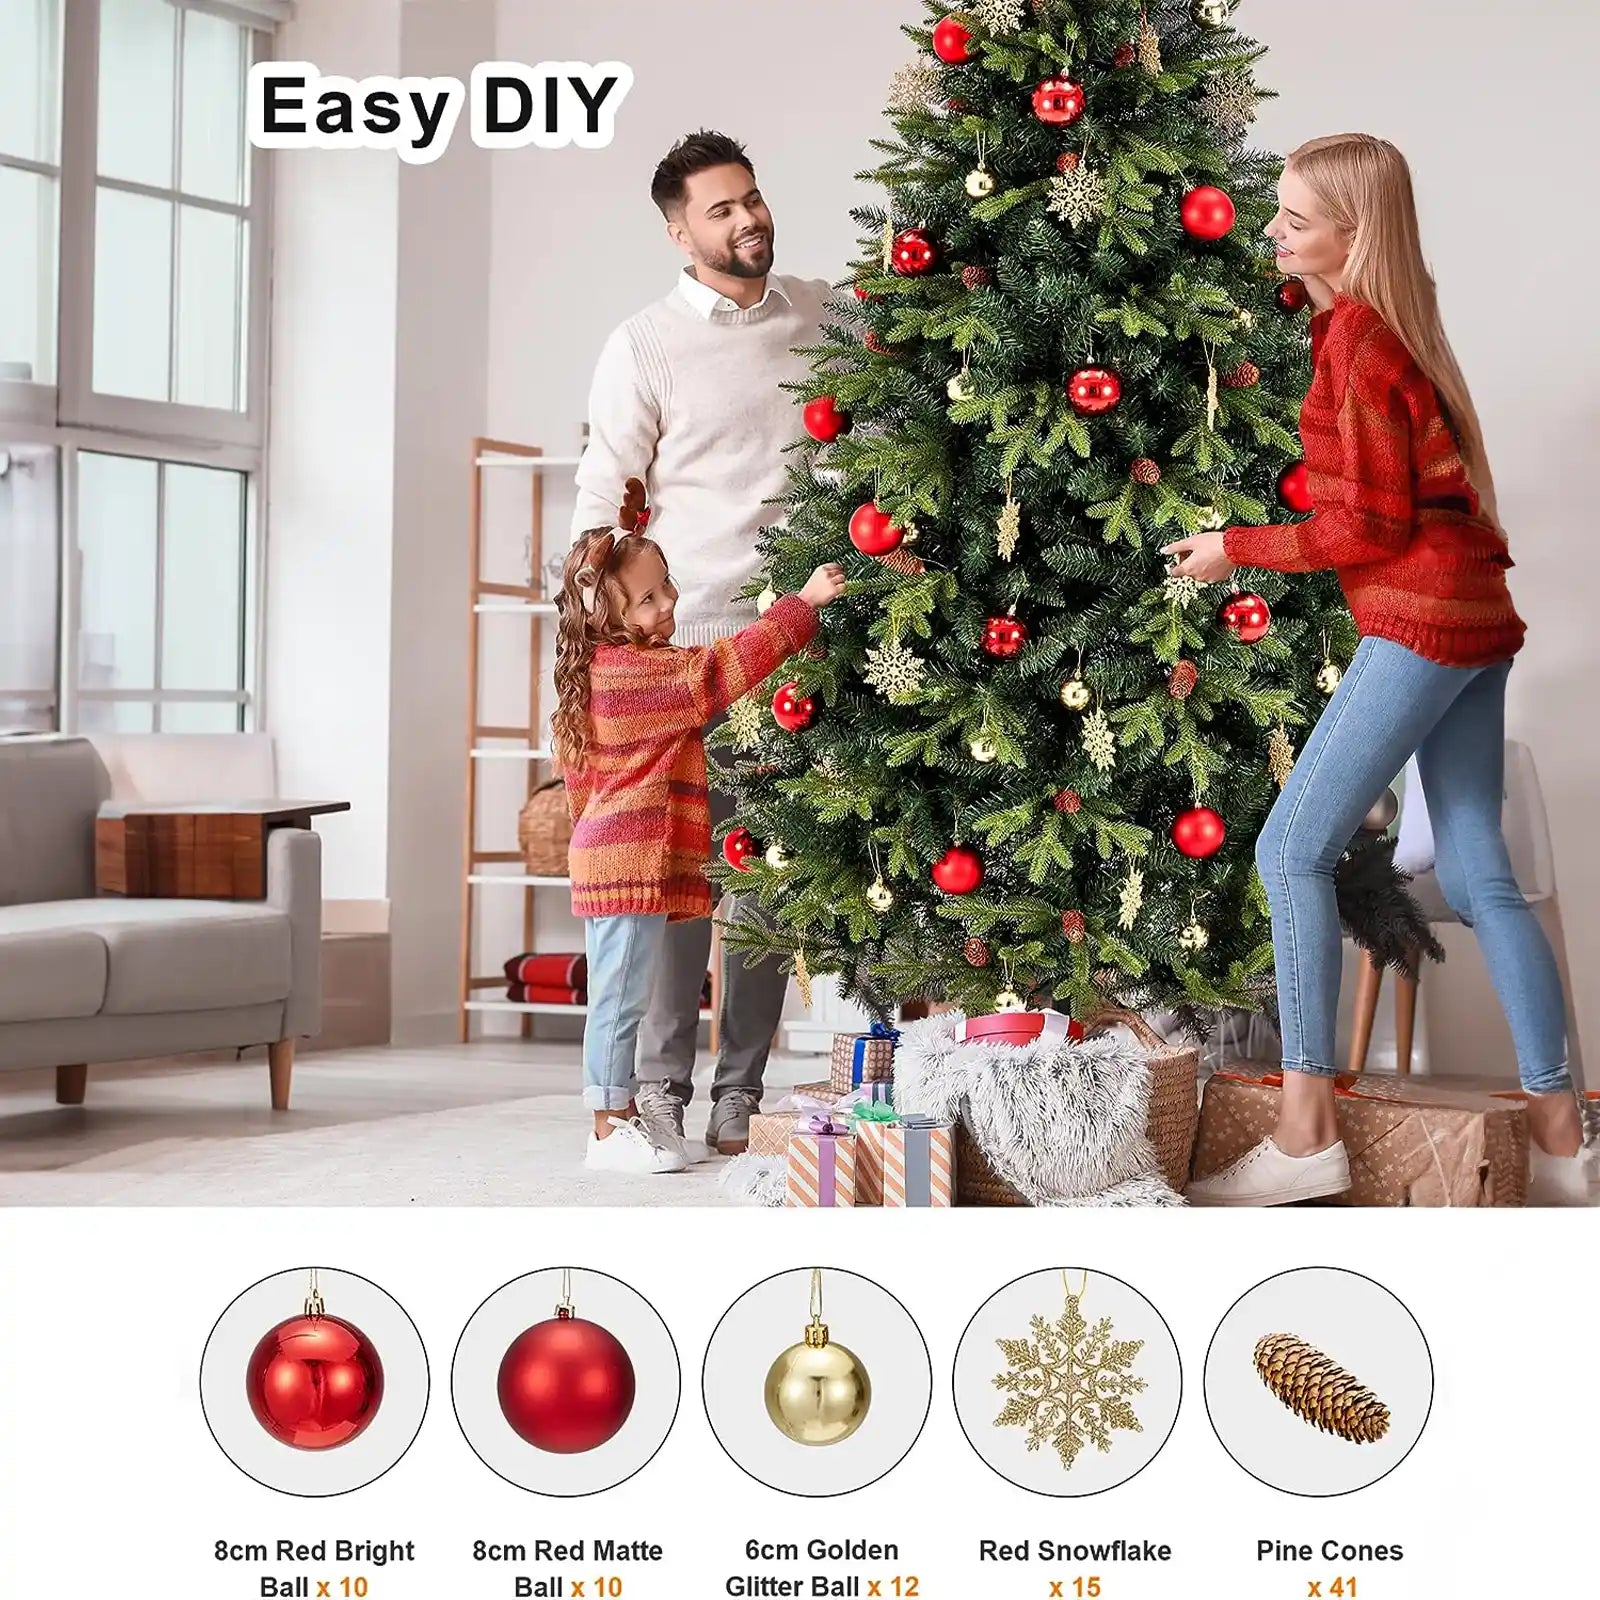 7.5 feet Artificial Christmas Tree Holiday Tree w/ 1,400 Branch Tips, Christmas Tree Decorations, Christmas Tree Stand Metal Hinges & Foldable Base, Easy Assembly for Home